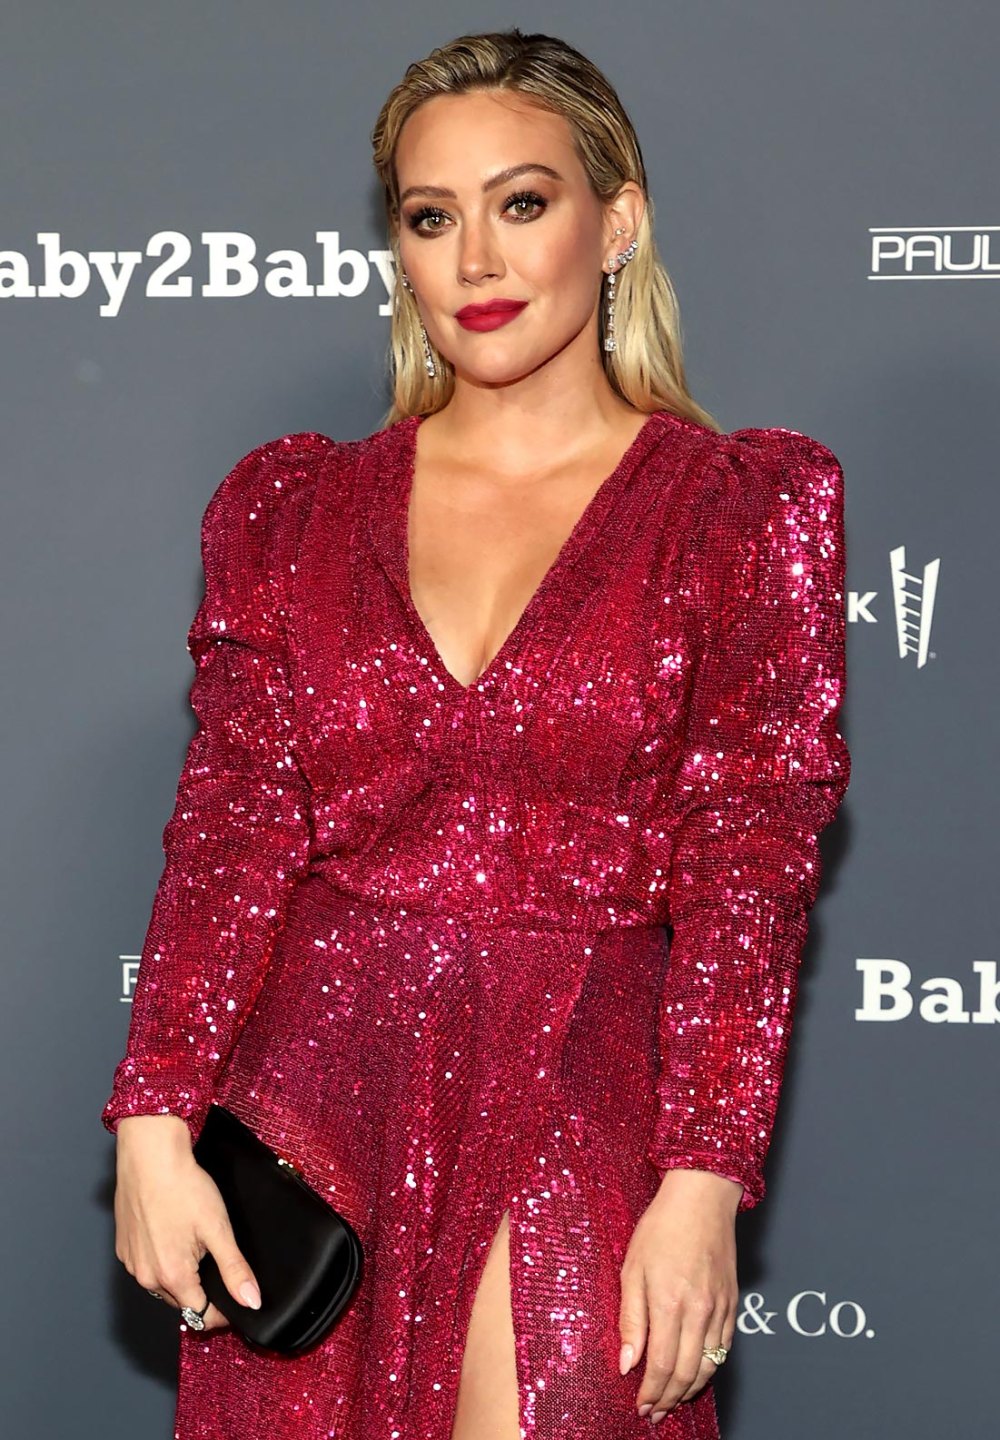 Hilary Duff Reveals That Her Cooking 'Almost Burnt' Her House Down While Making Dinner